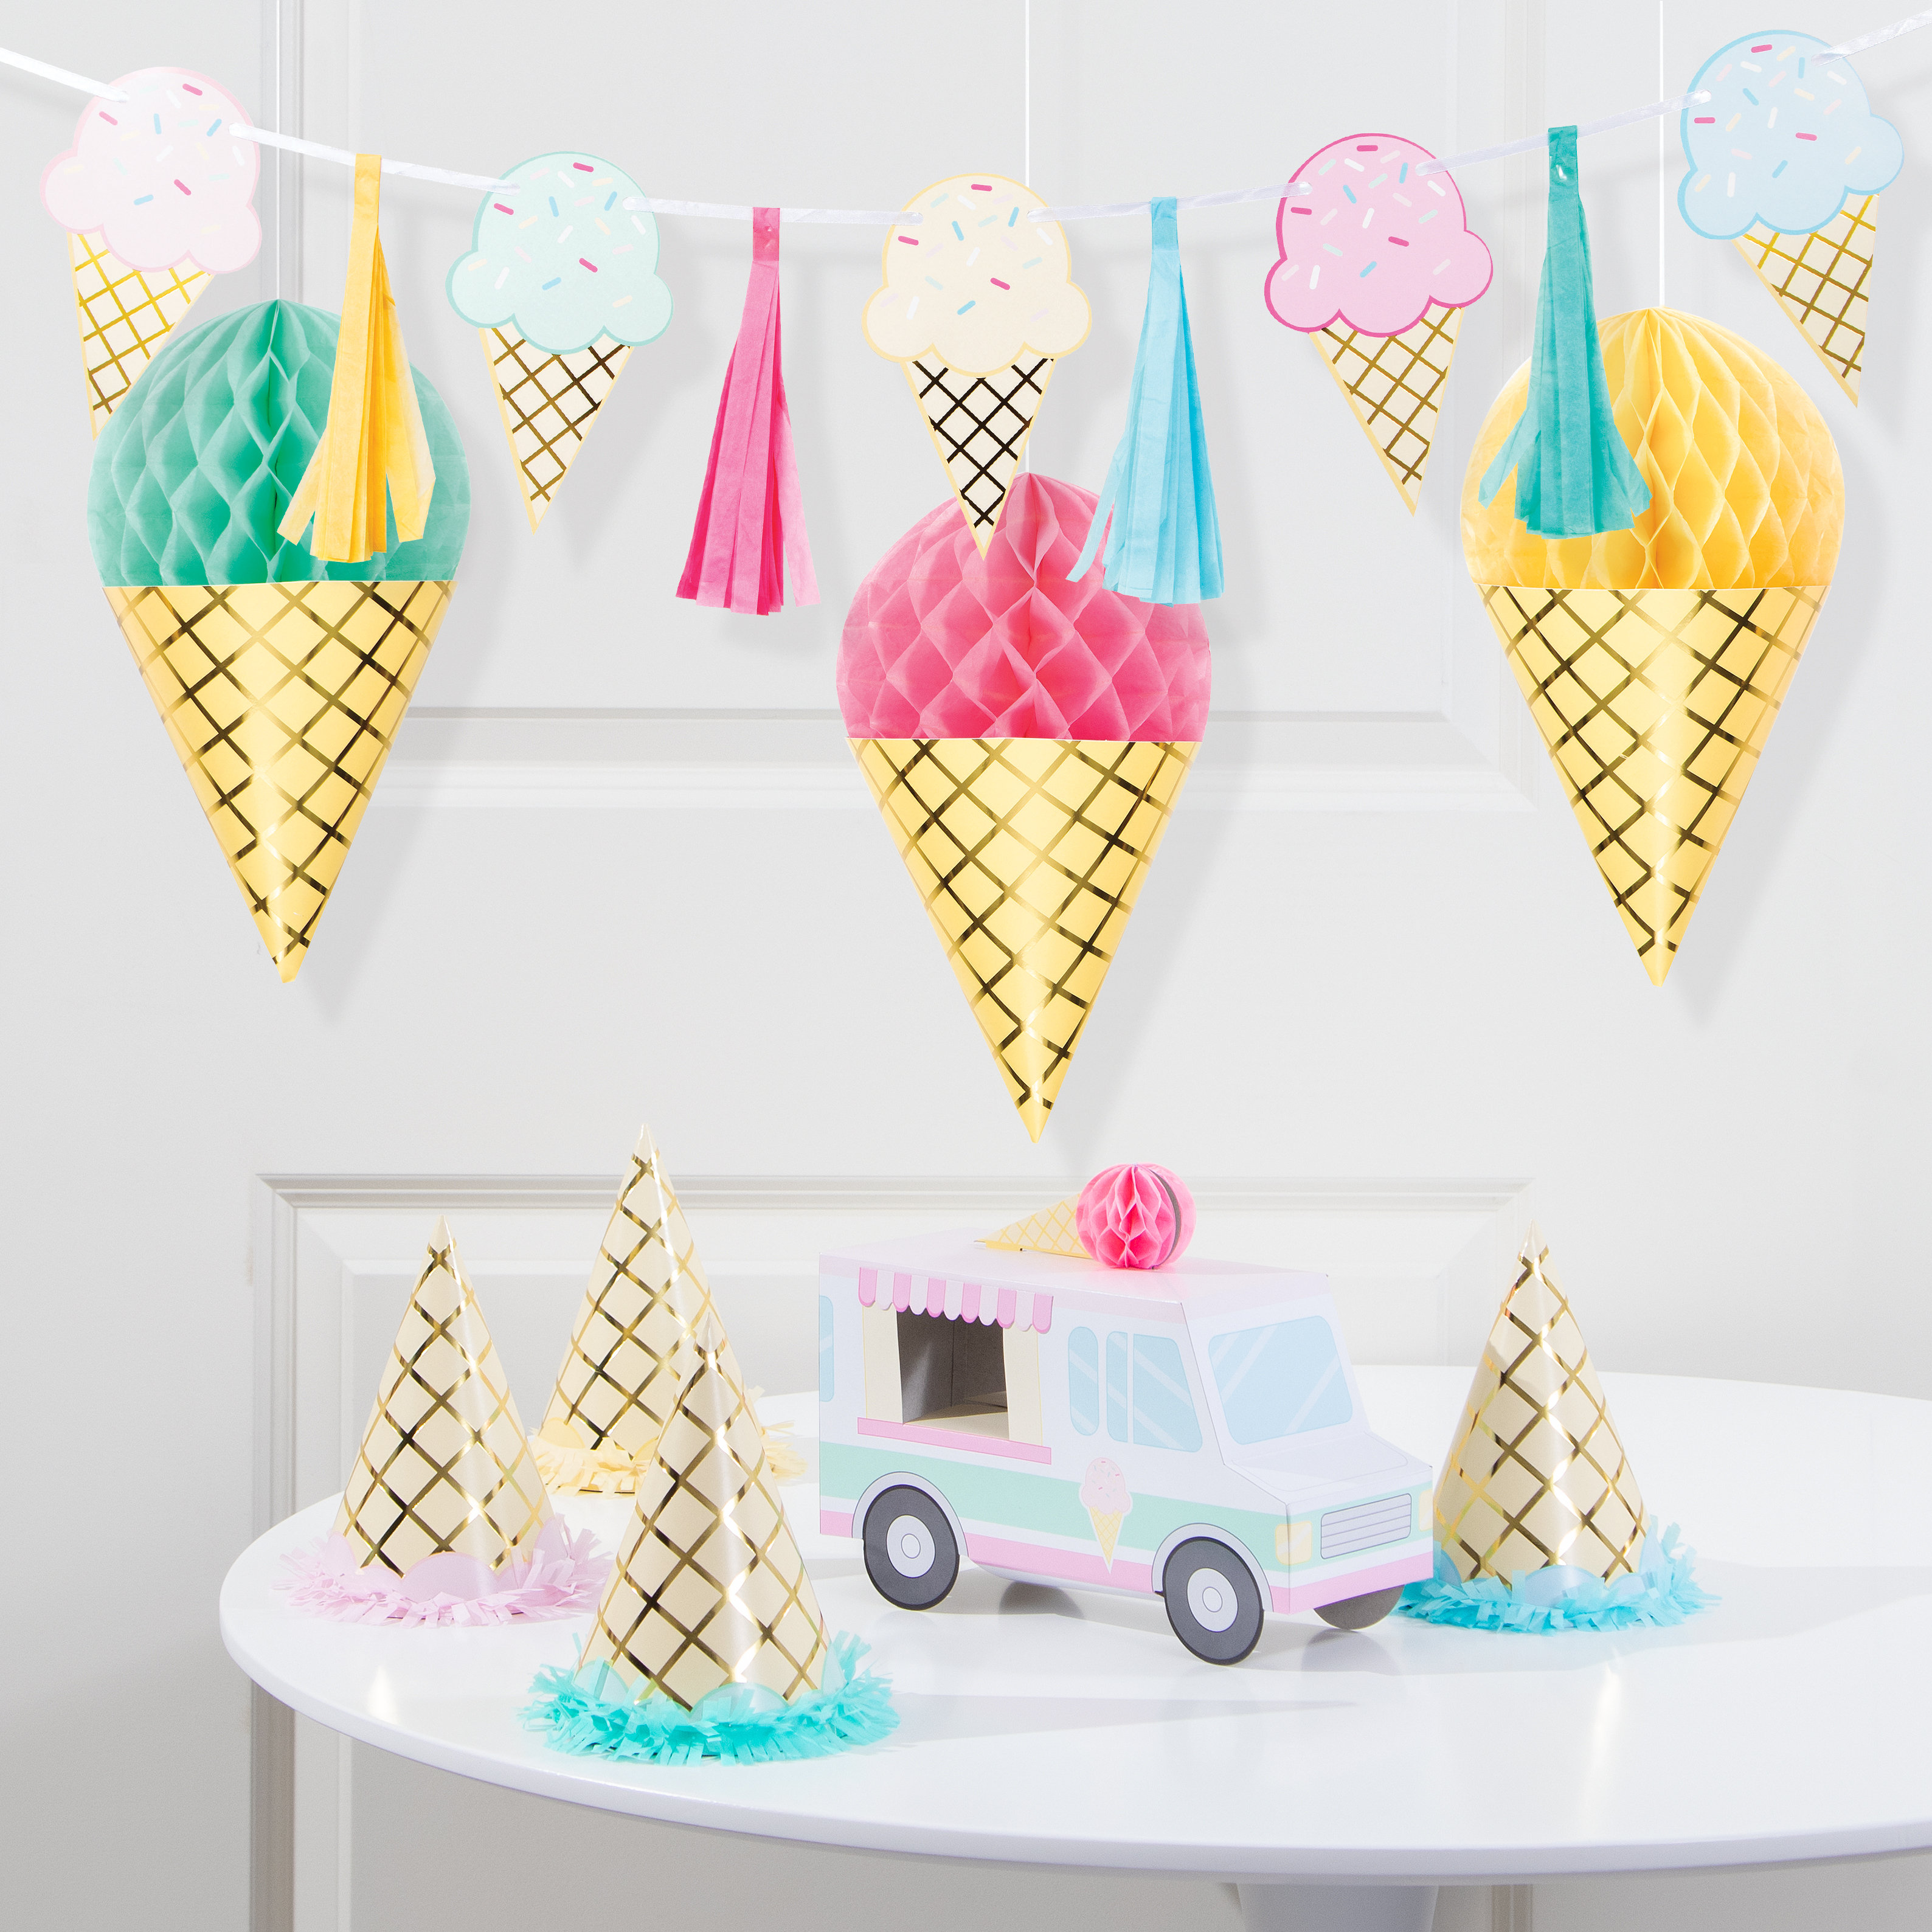 52 Pieces Ice Cream Birthday Decorations Happy Birthday Banner Ice Cream Honeycomb Centerpiece Ice Cream Hanging Swirls Colorful Balloons for Birthday Baby Showr Party Favors Supplies